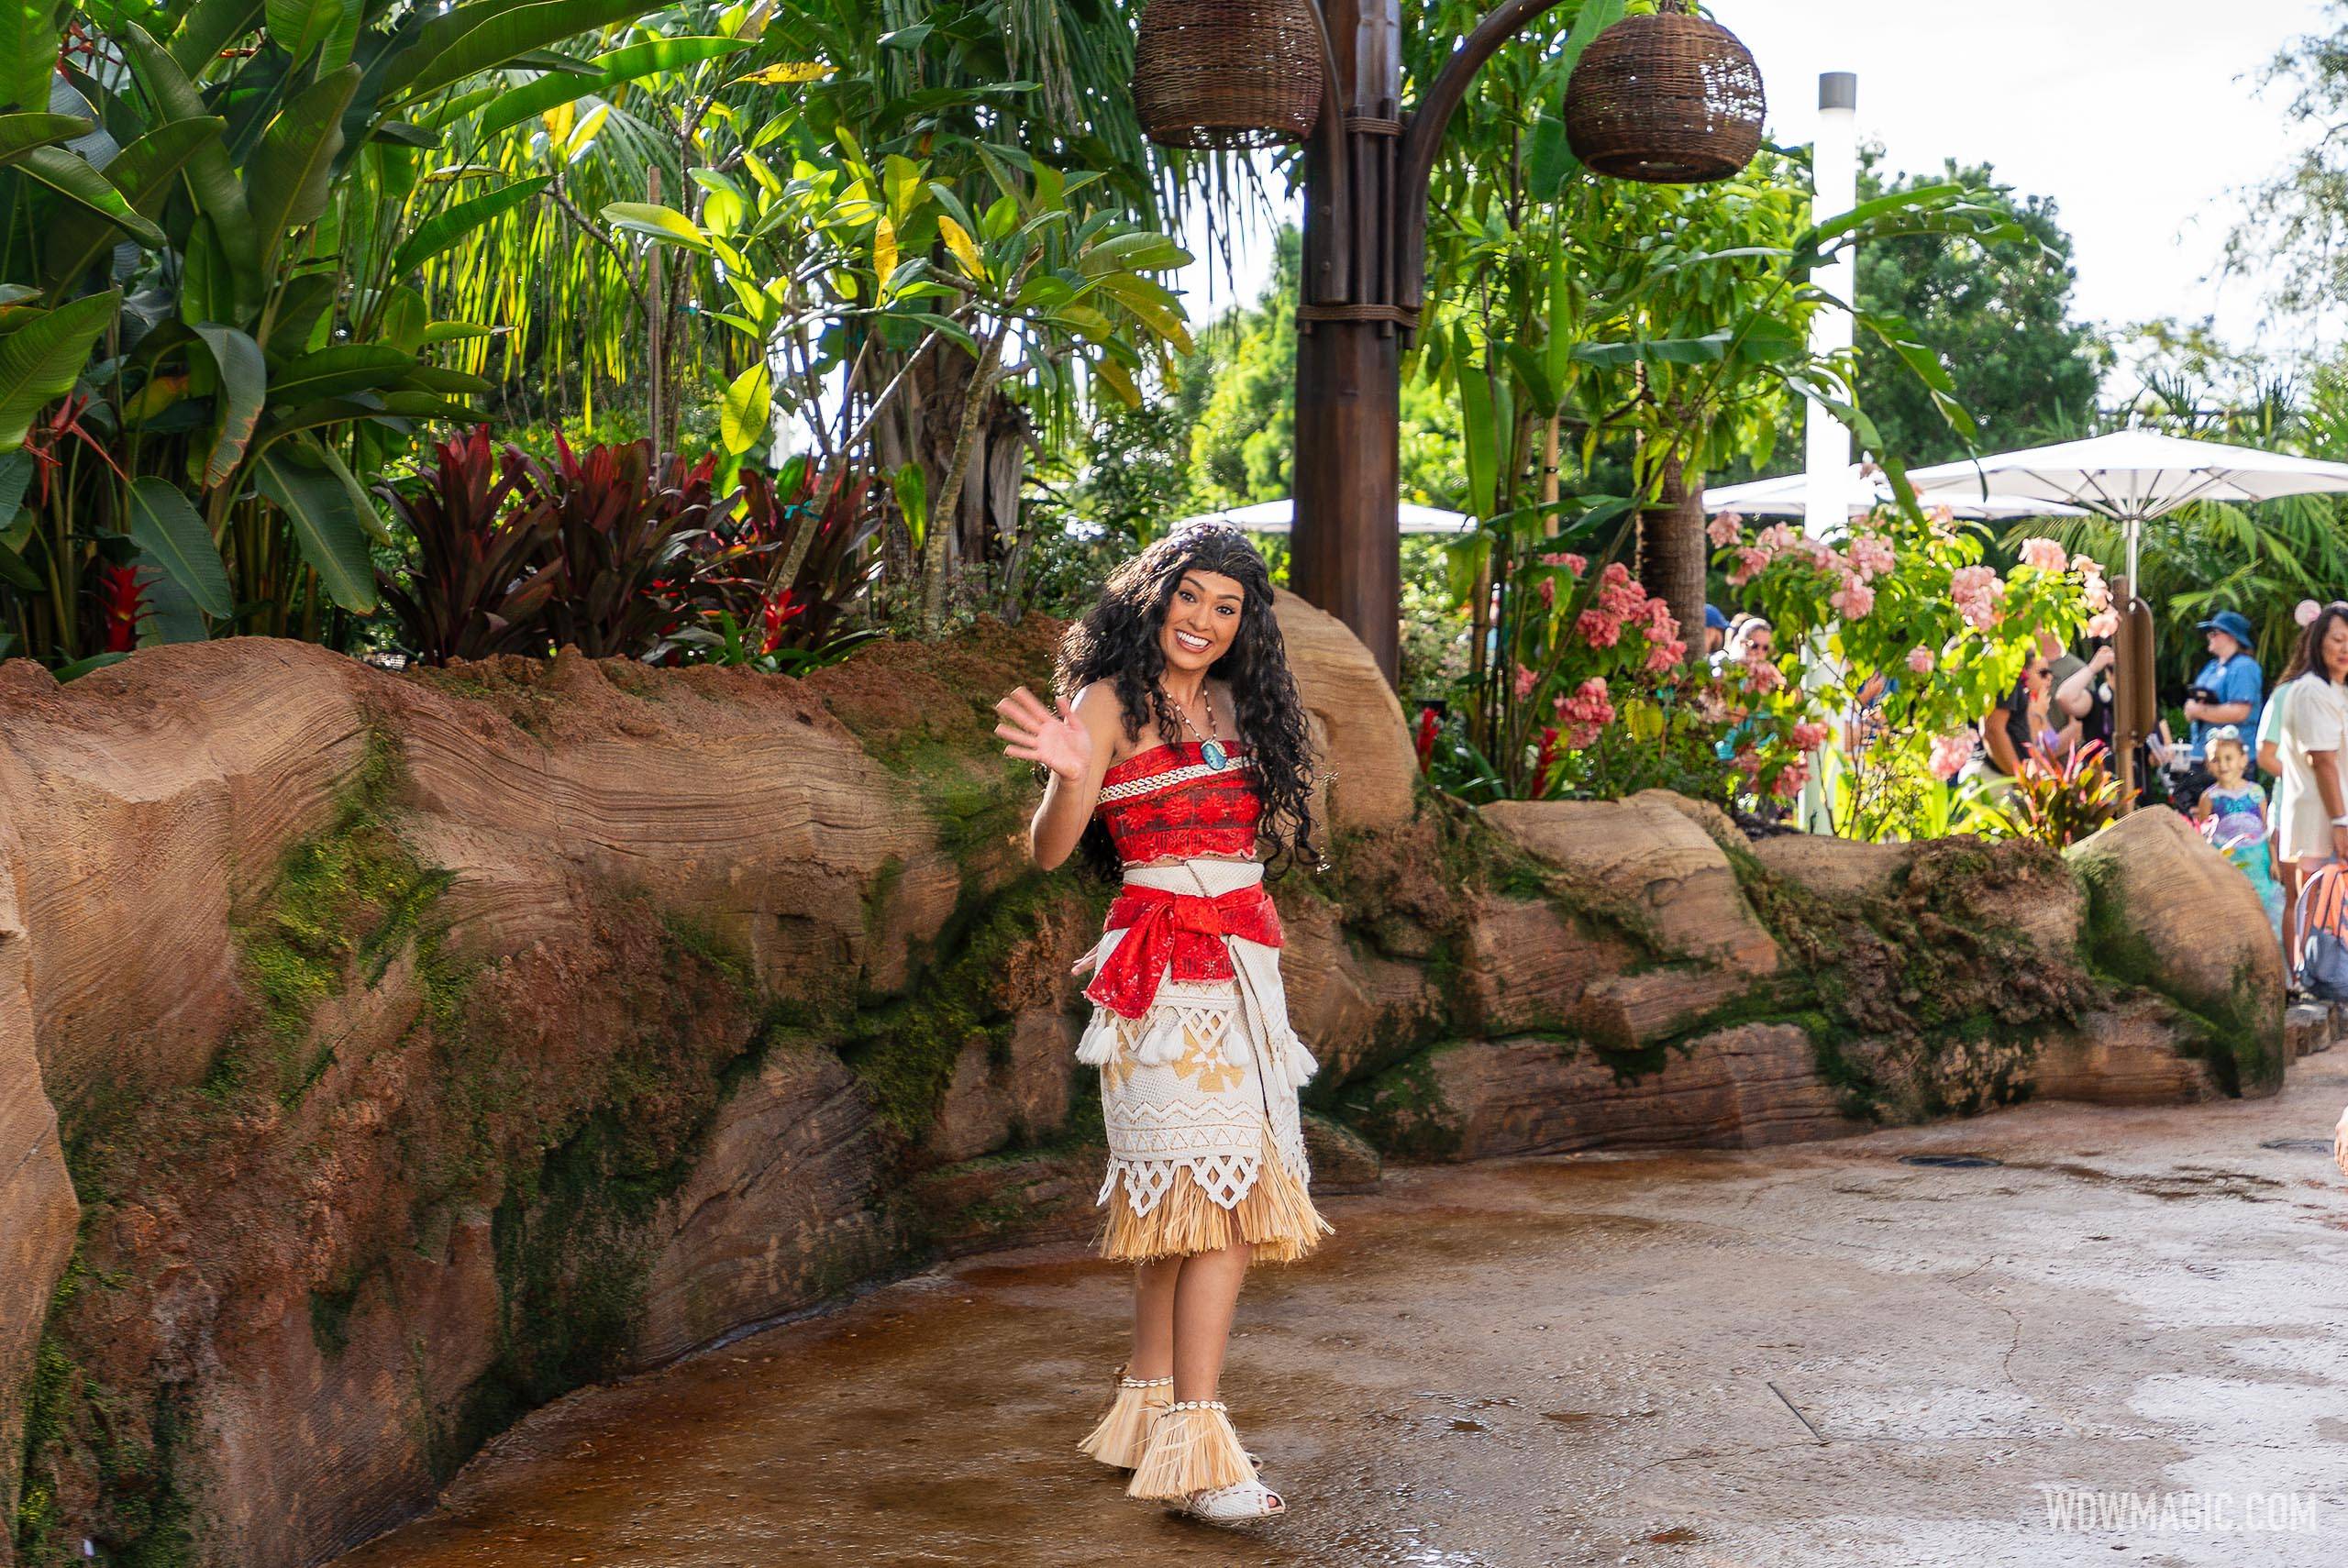 Moana character meet and greet at Journey of Water in EPCOT